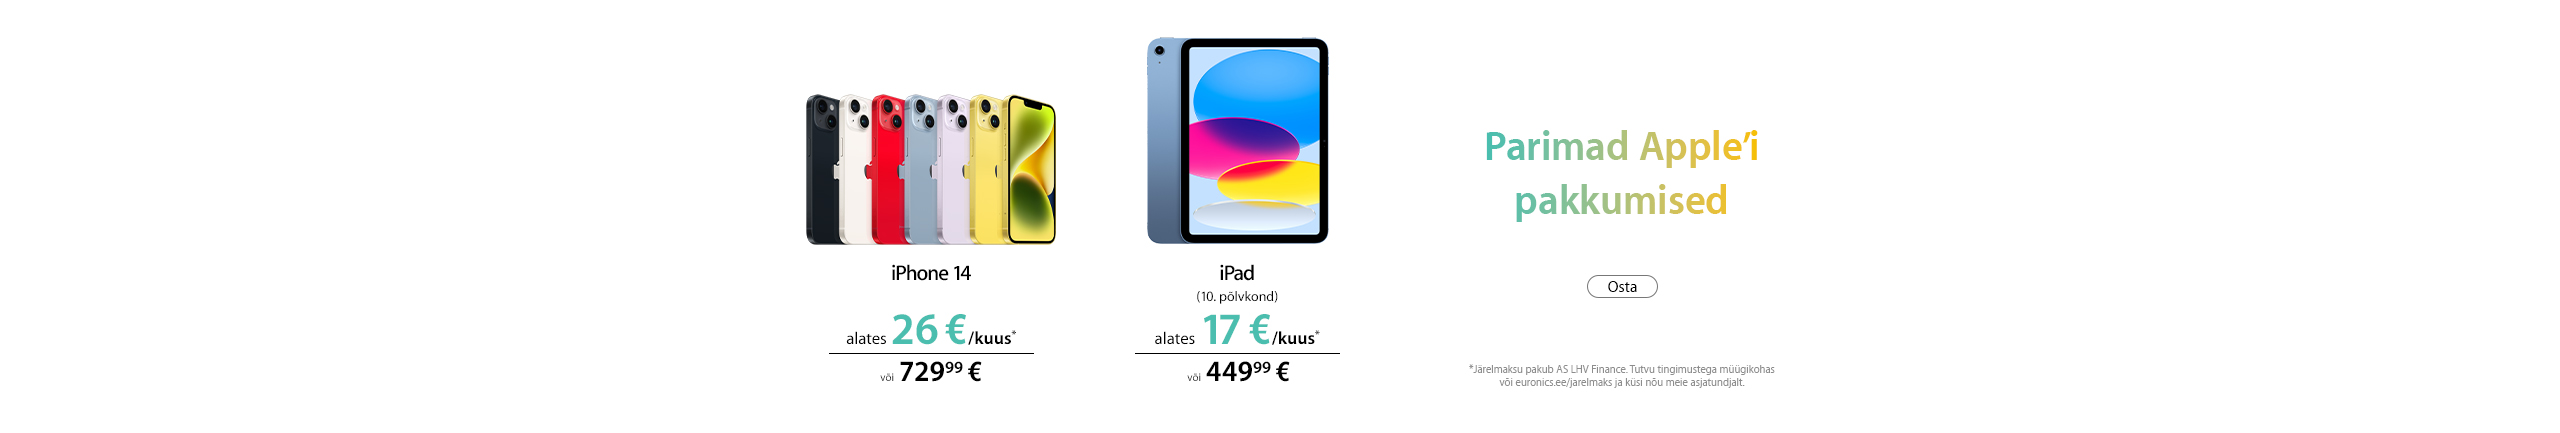 Discover Apple Days offers